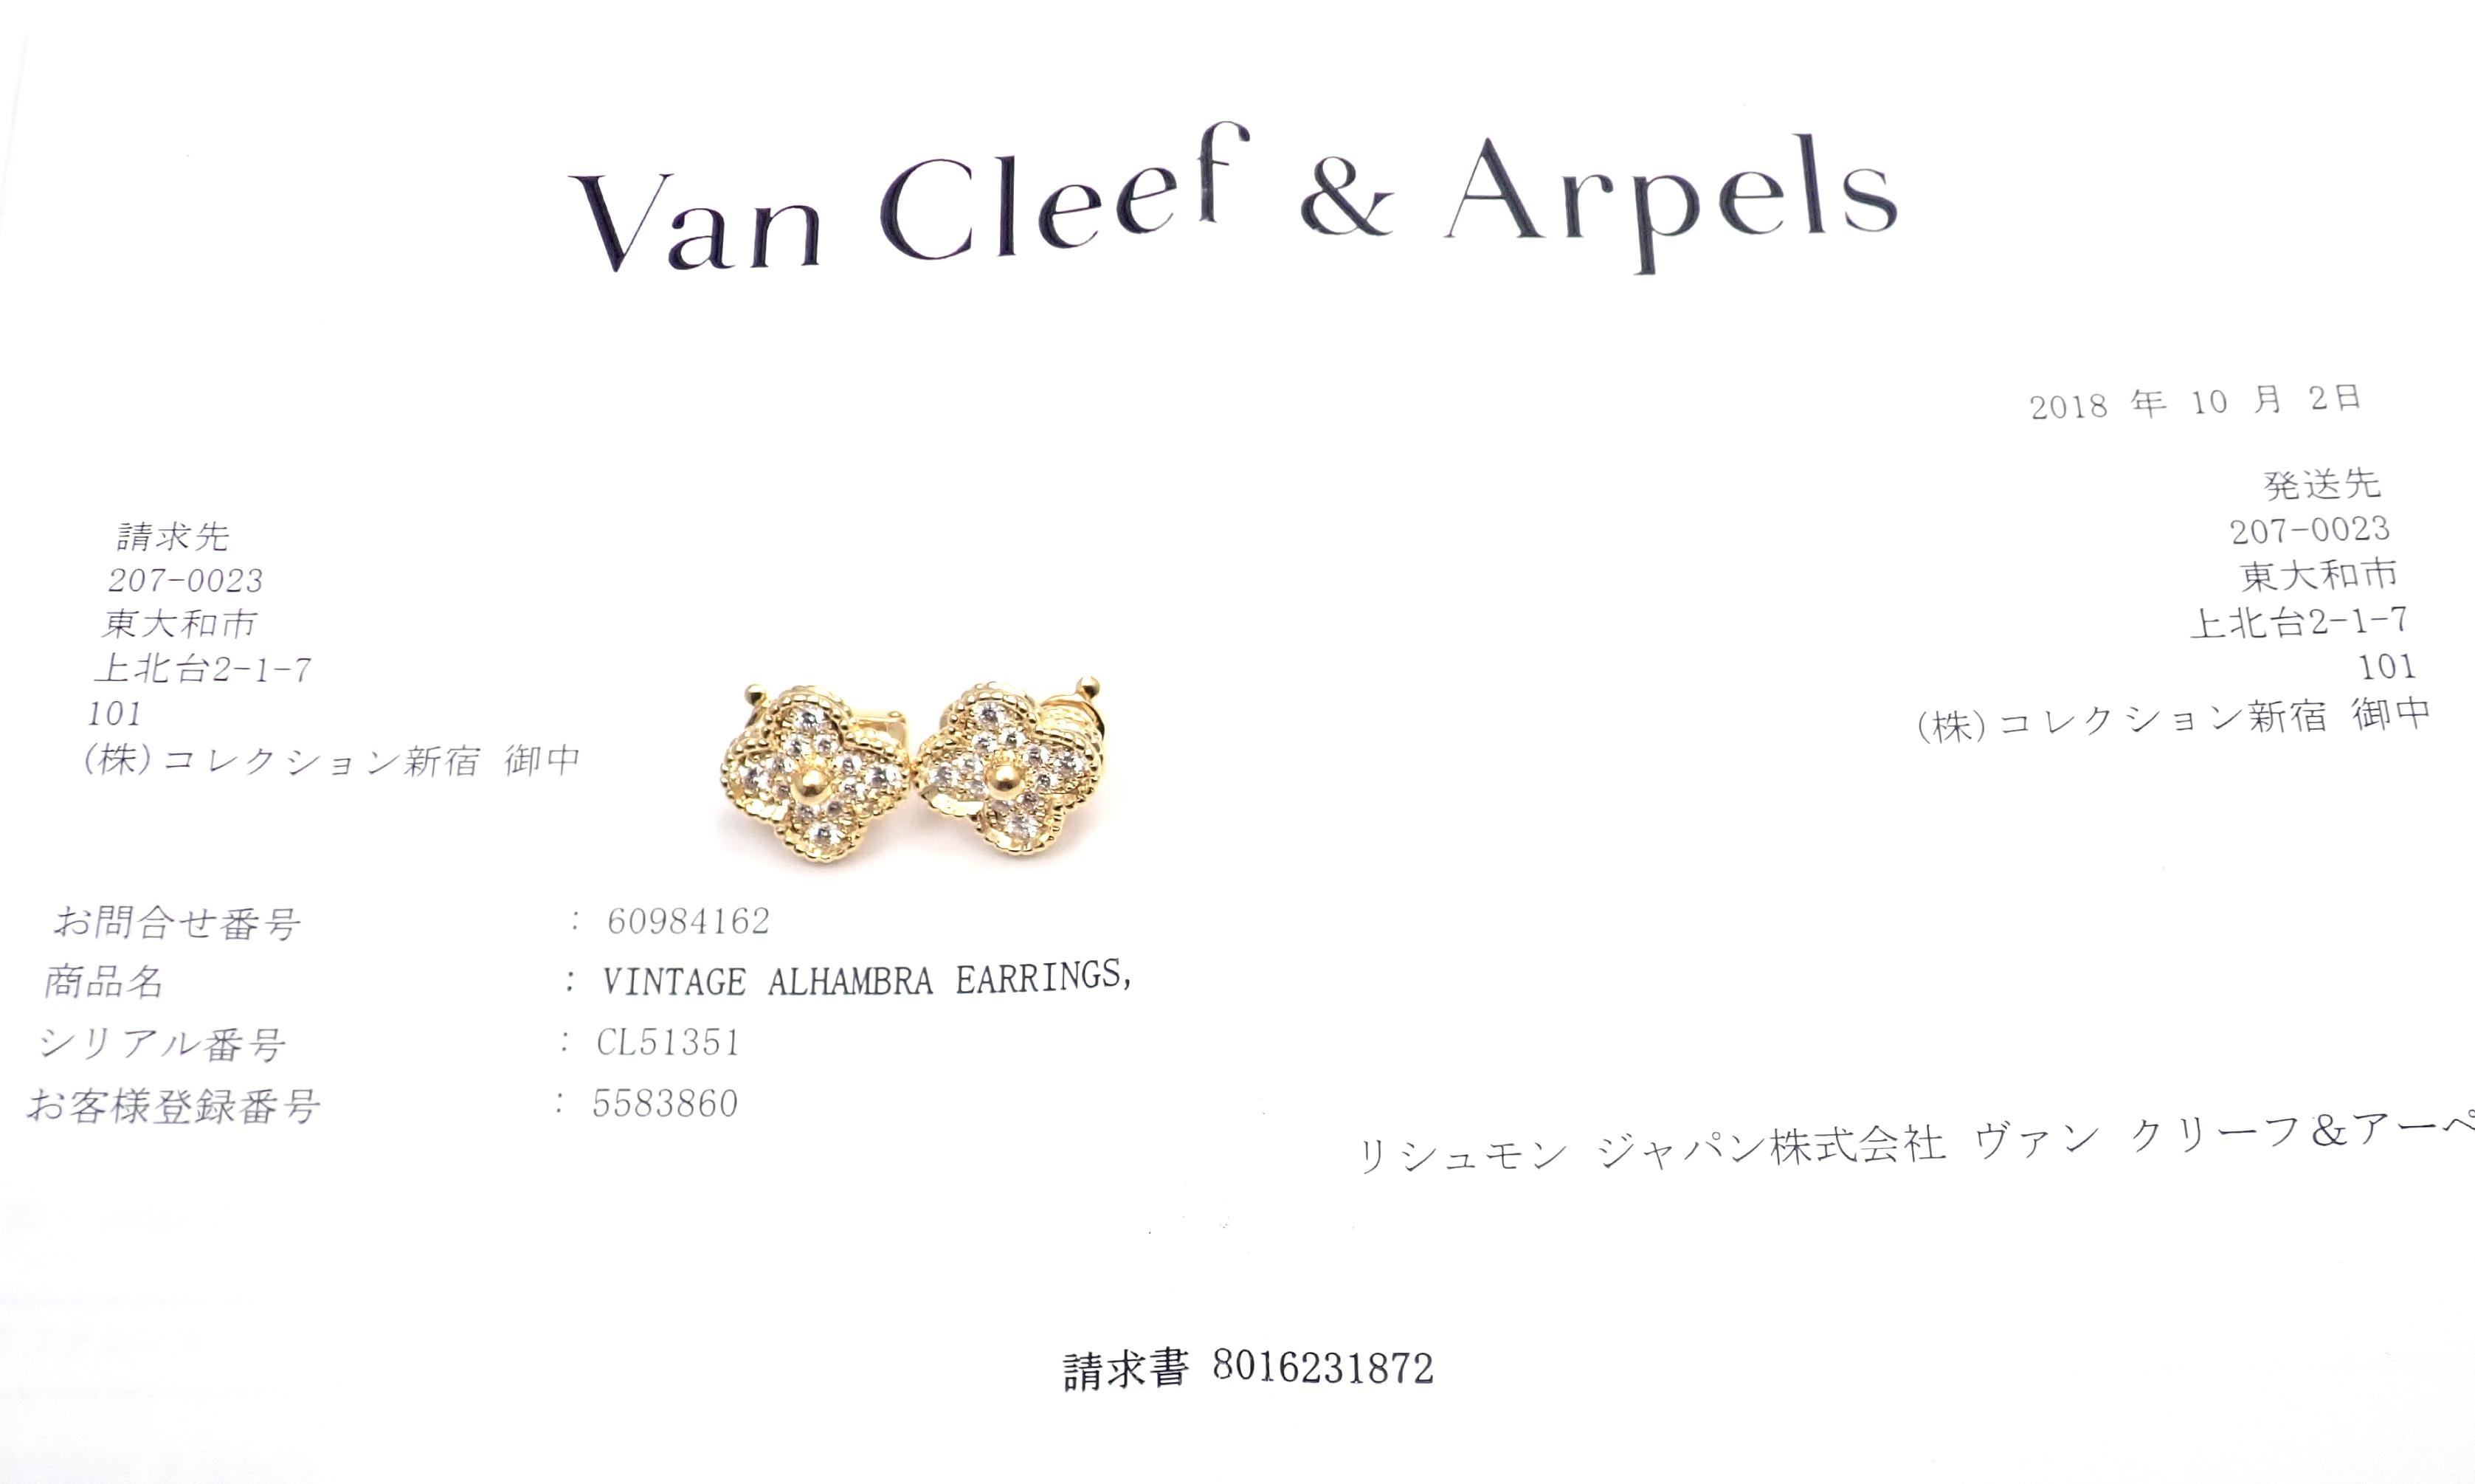 18k Yellow Gold Diamond Vintage Alhambra Earrings by Van Cleef & Arpels.
With 24 round brilliant cut diamond VVS1 clarity, E color total weight .96ct
These earrings are for pierced ears.
These earrings were just service at the VCA store and come